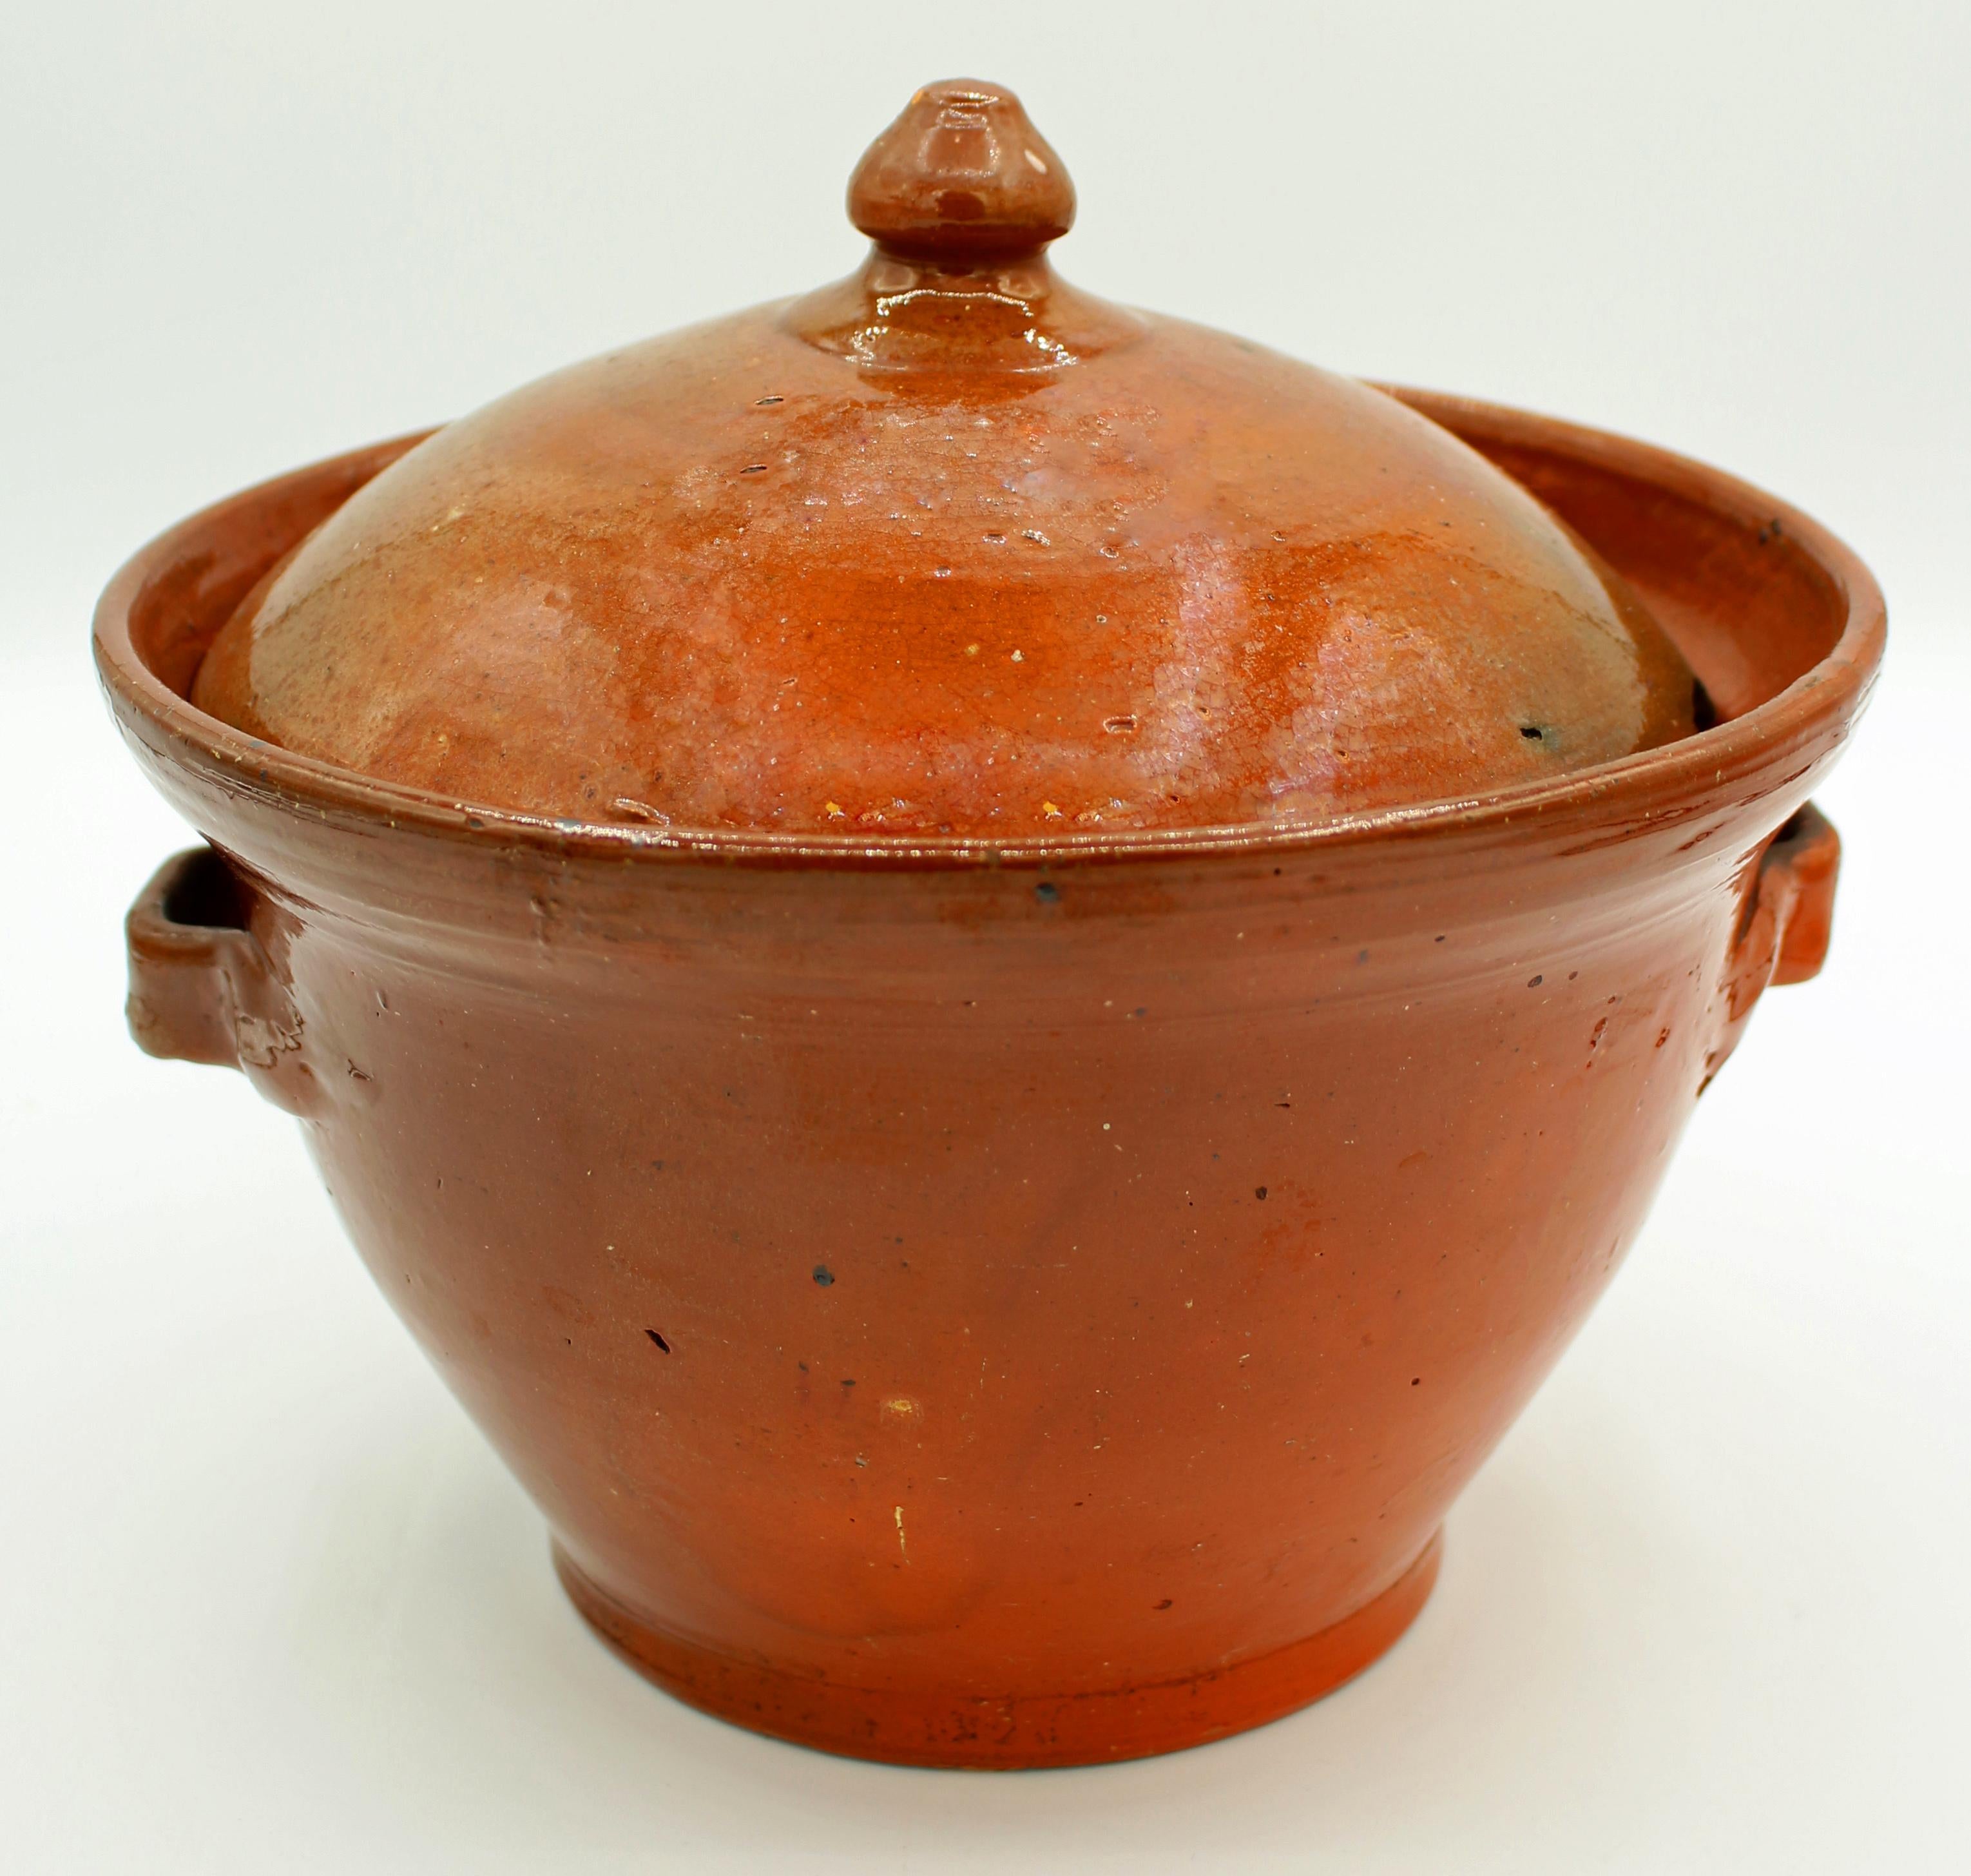 c. 1930s Pottery covered soup tureen in burnt orange glaze by Ben Owen I. The tureen is nearly perfect but the lid has multiple rim losses. 